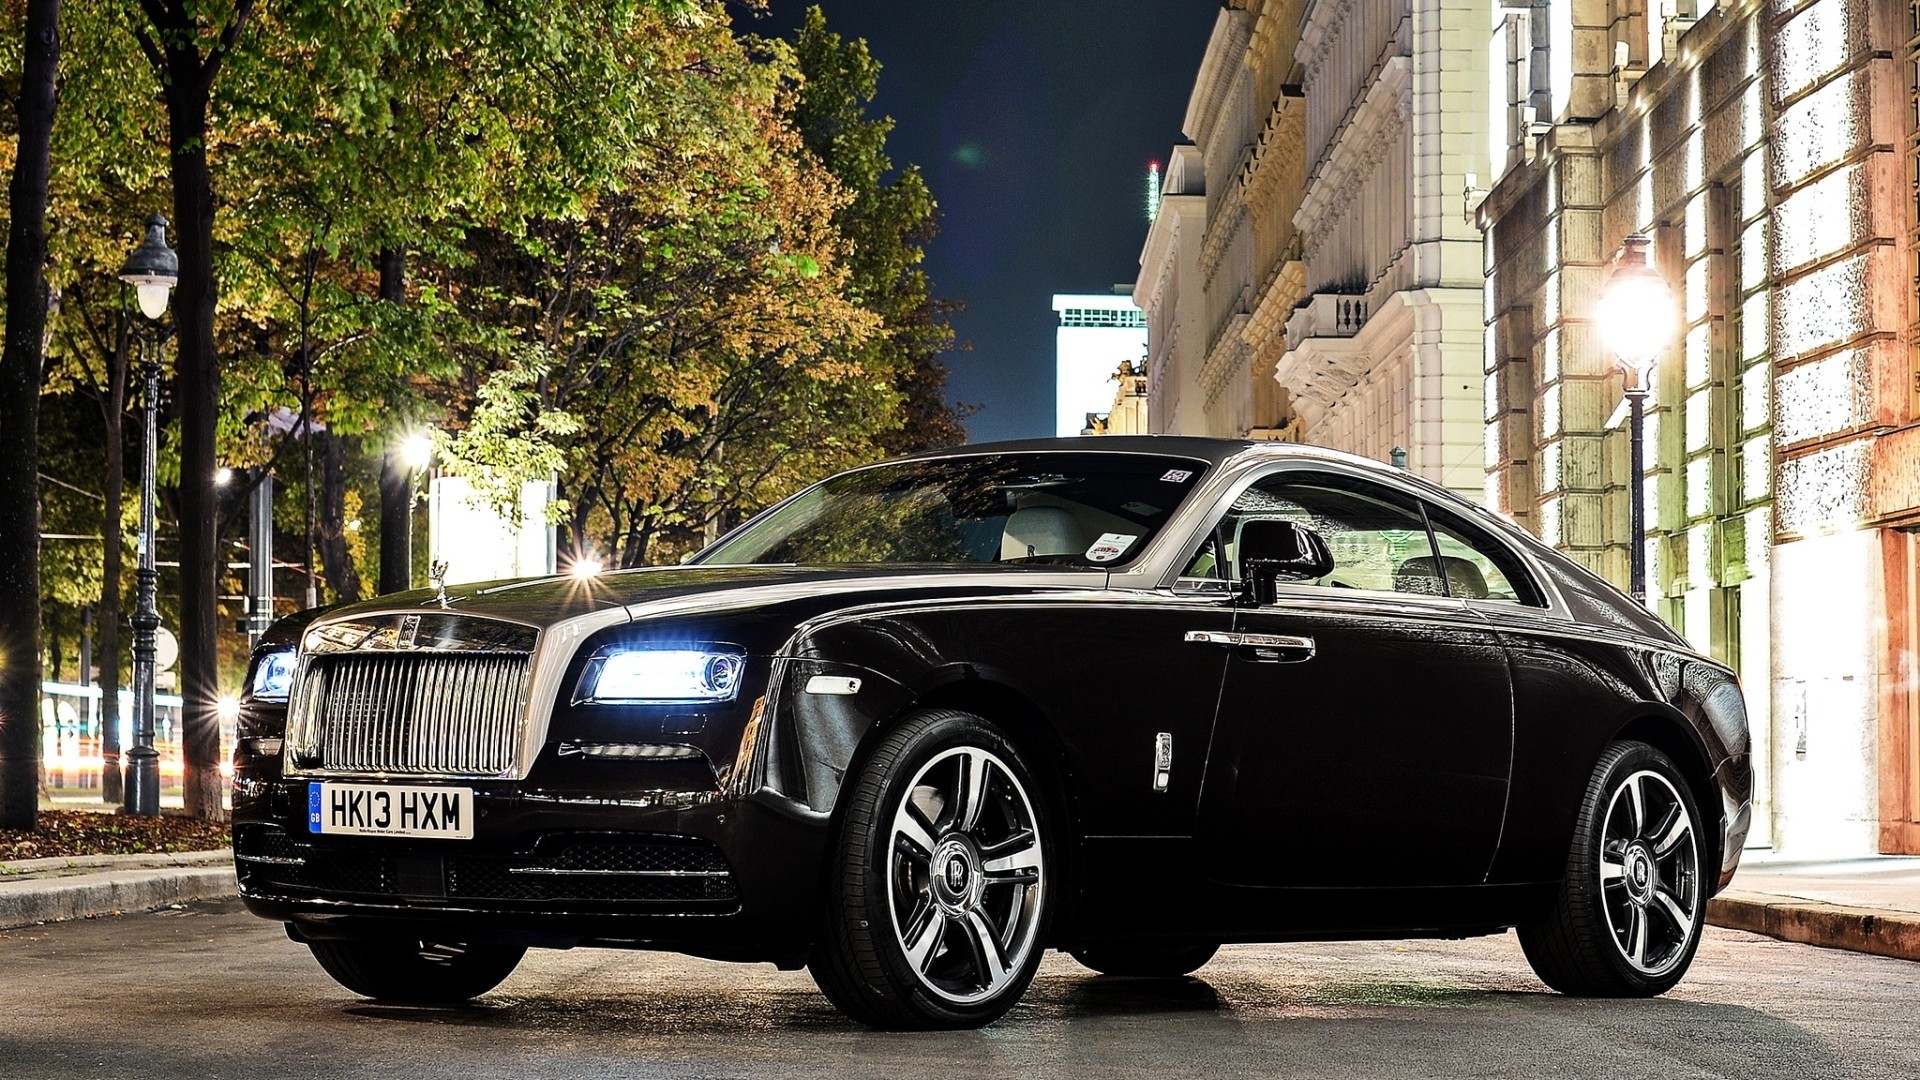 Rolls Royce Cars Wallpapers Free Download HD Latest Motors Images Android Pinterest Rolls royce cars, Wallpaper free download and Wallpaper